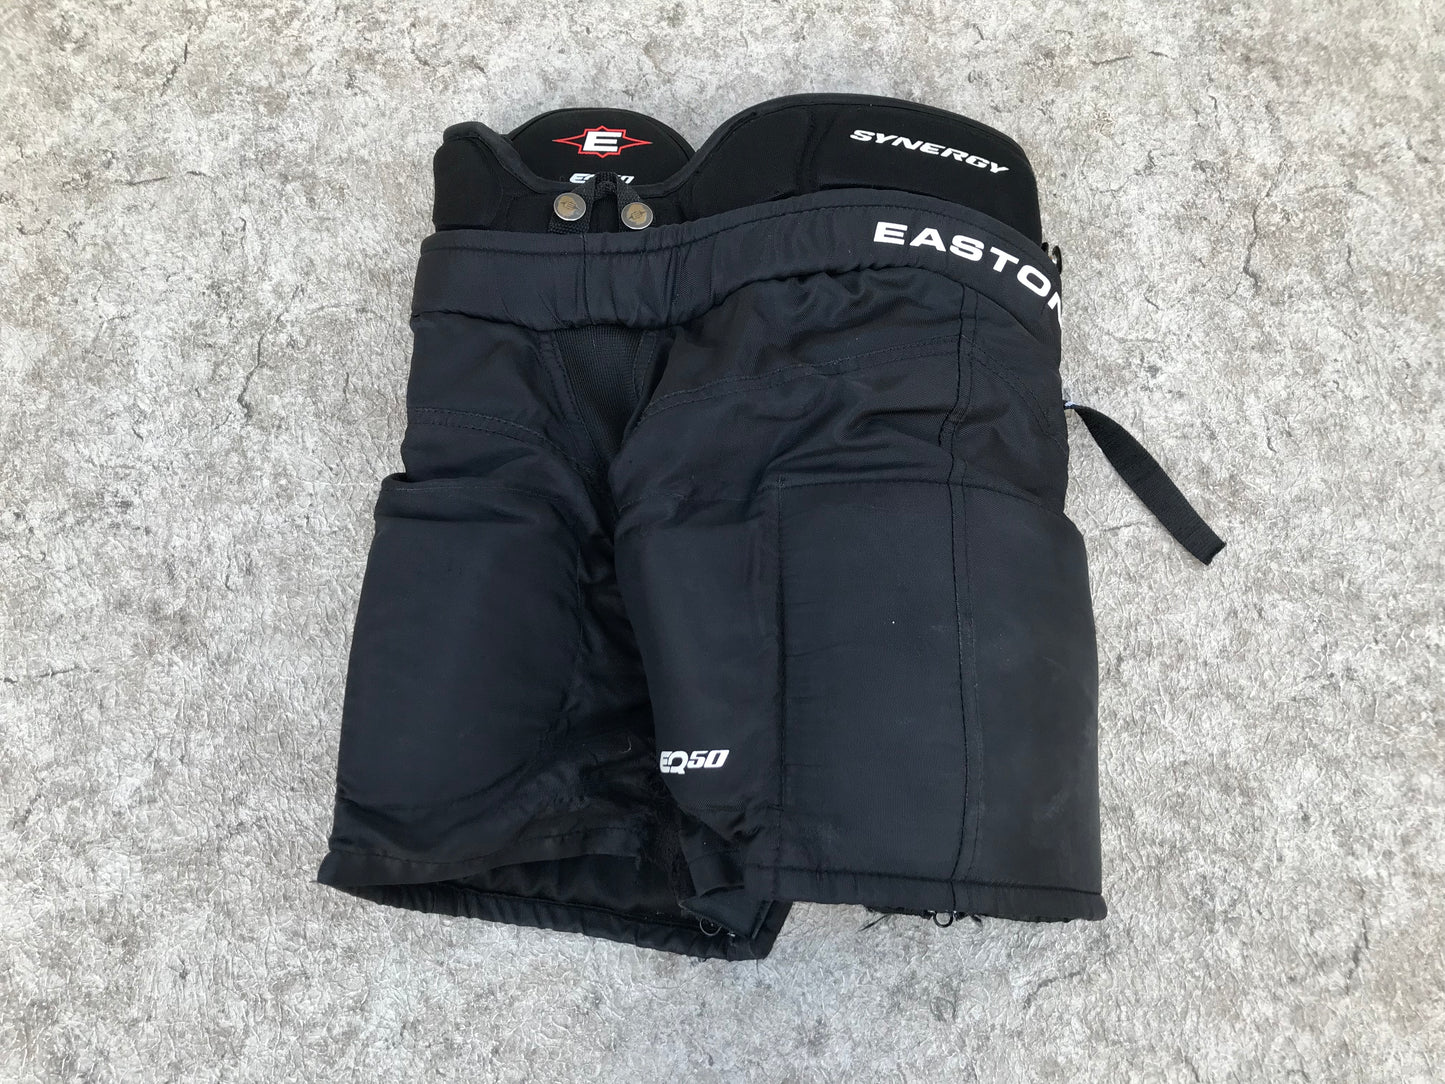 Hockey Pants Child Size Y X Large 5-6 Easton Black Red  MM 8014